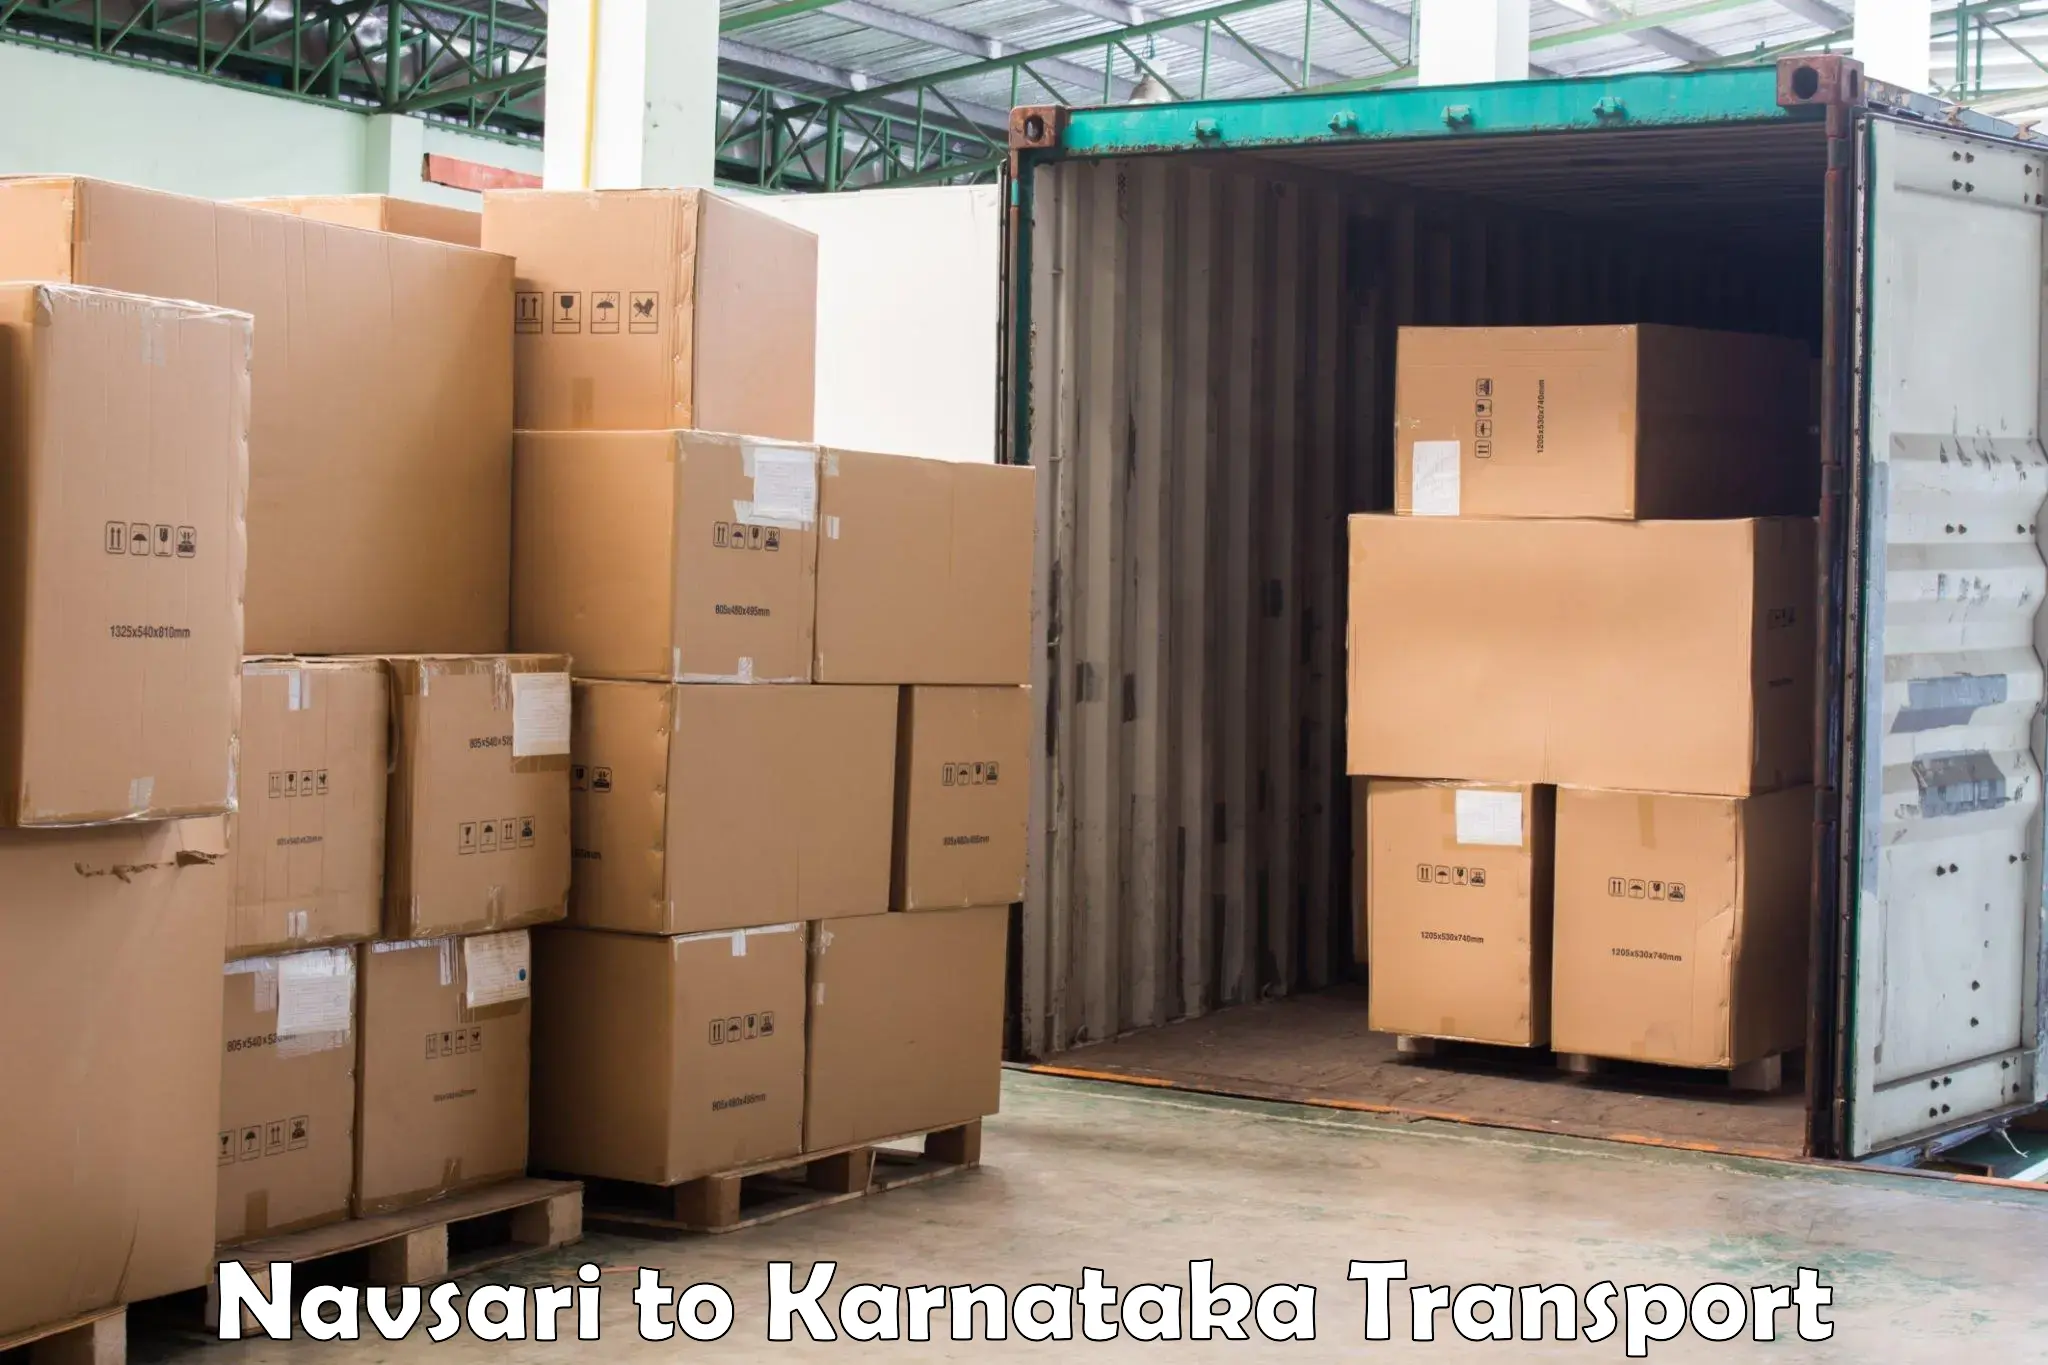 Air freight transport services in Navsari to Nanjangud